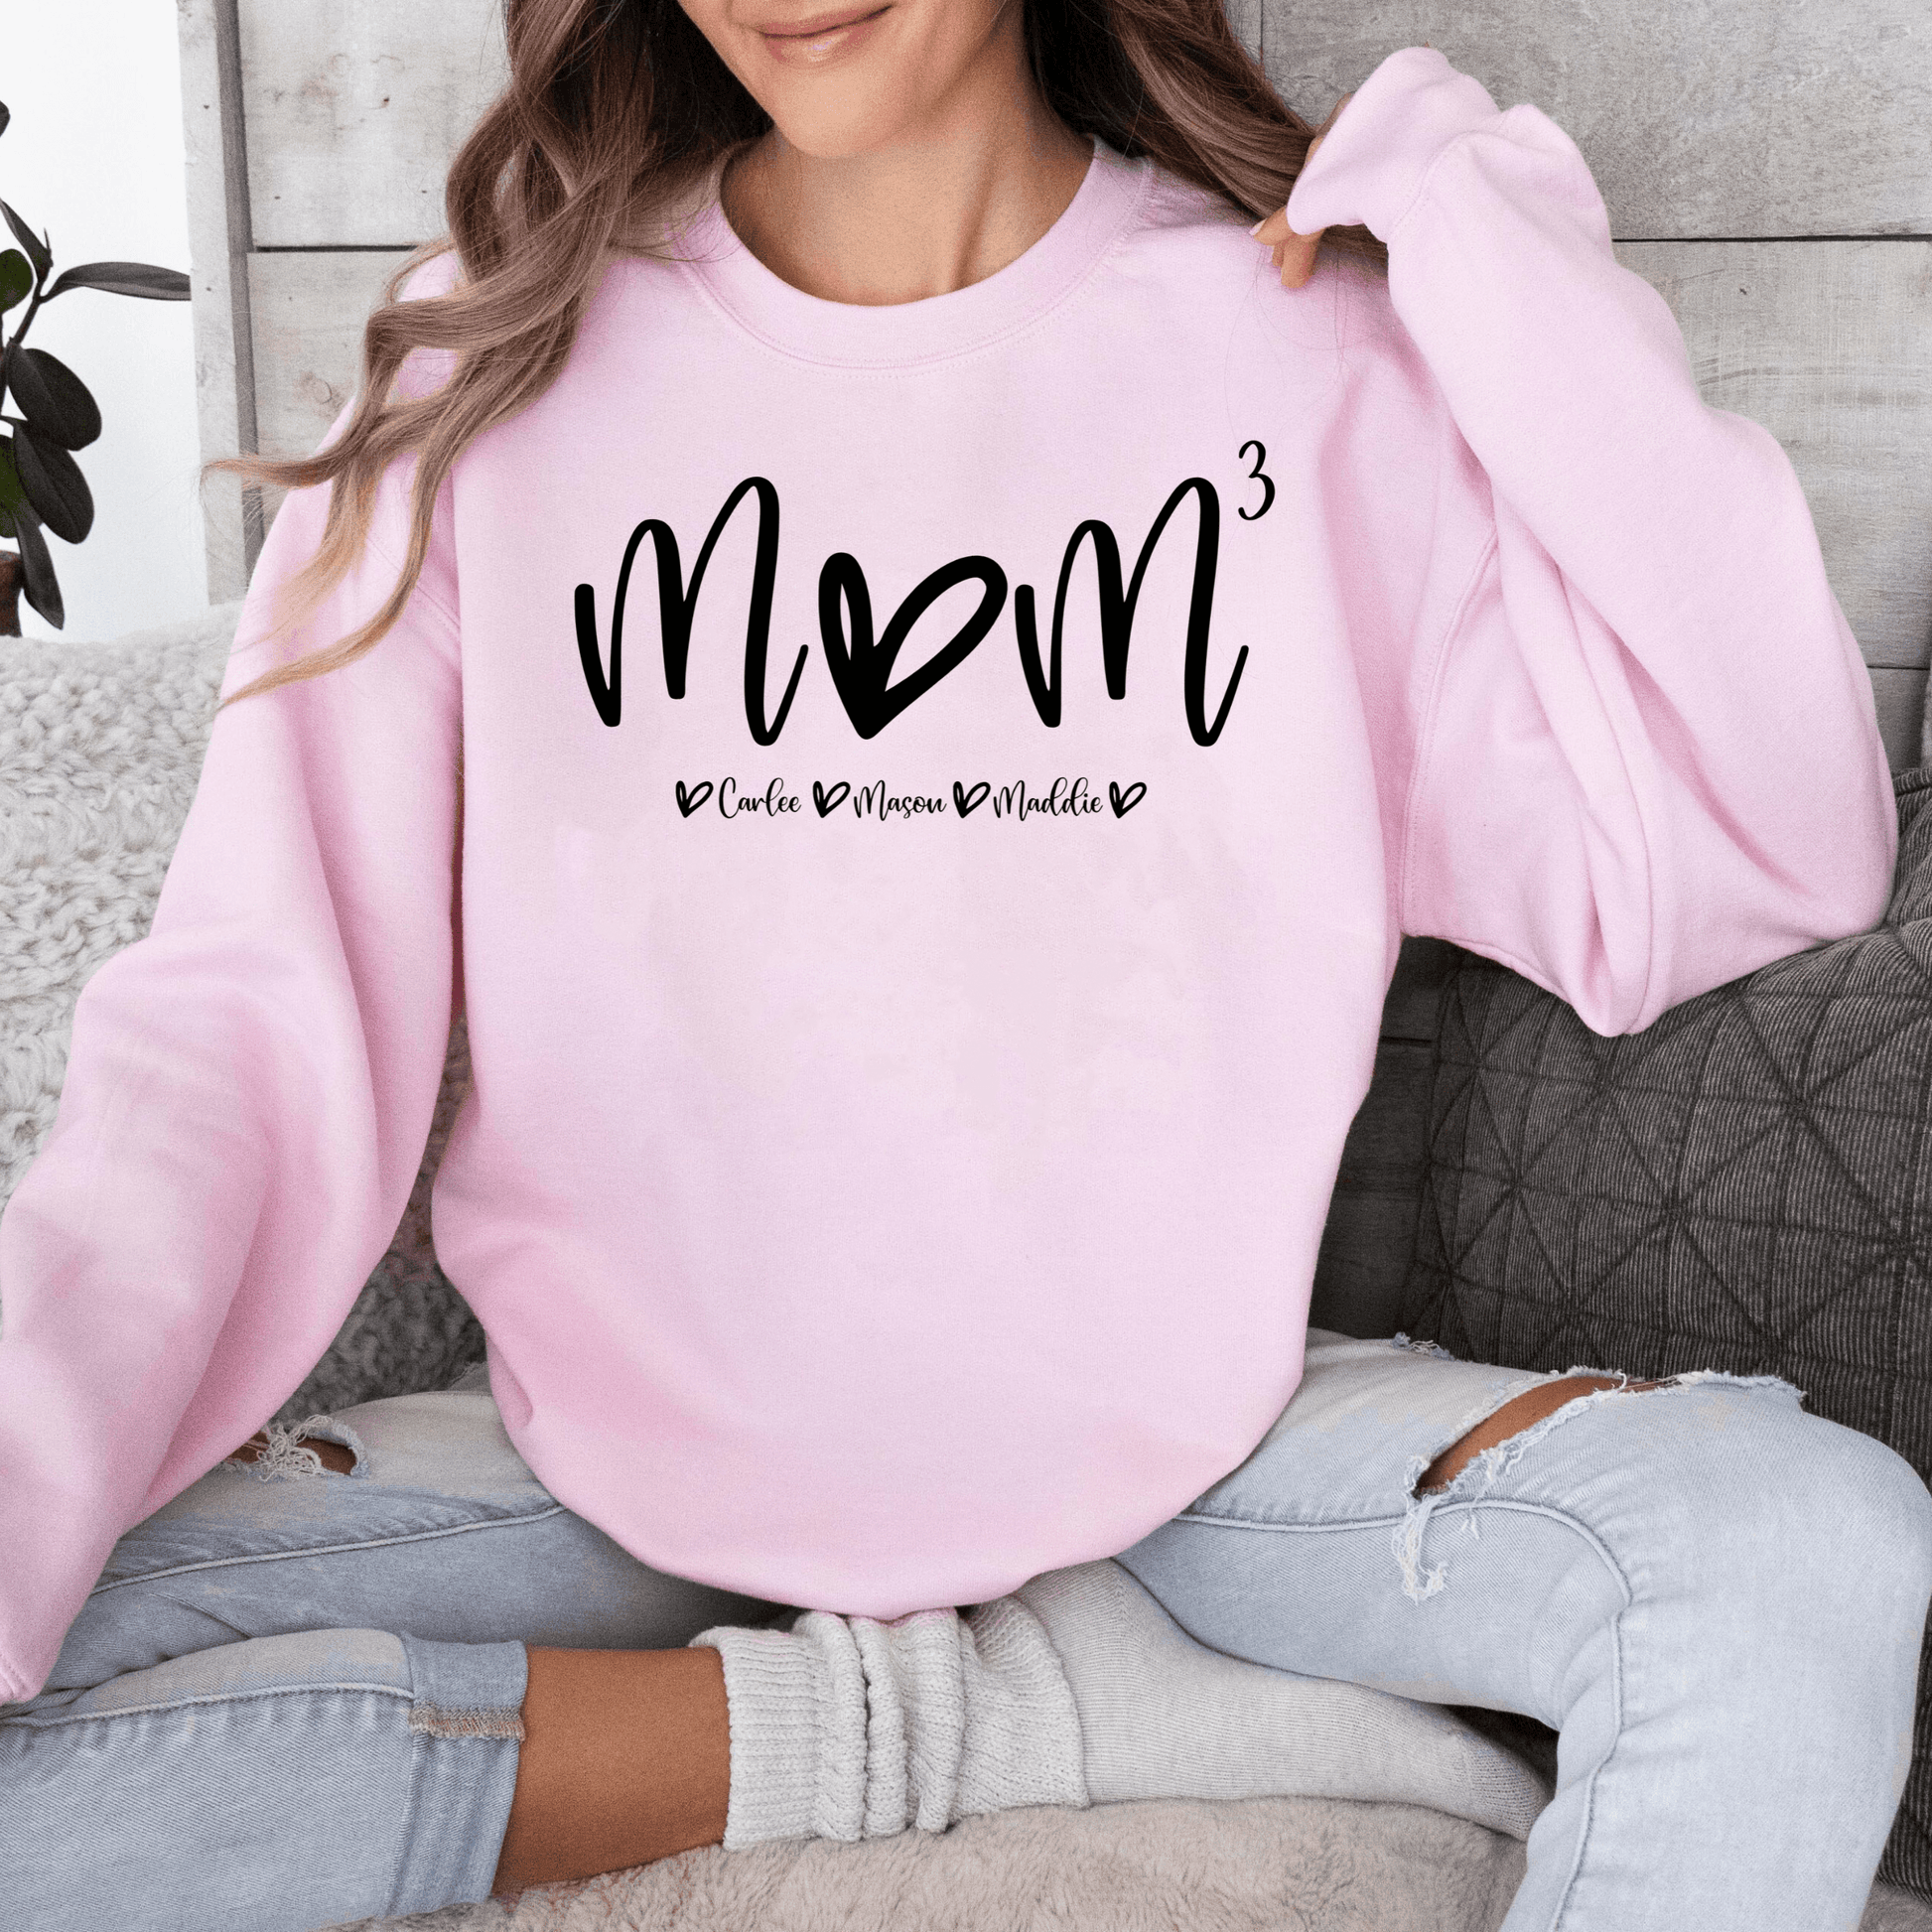 "Mom^N" Shirt: Customize Kids' Count & Names - Perfect Gift - GiftHaus